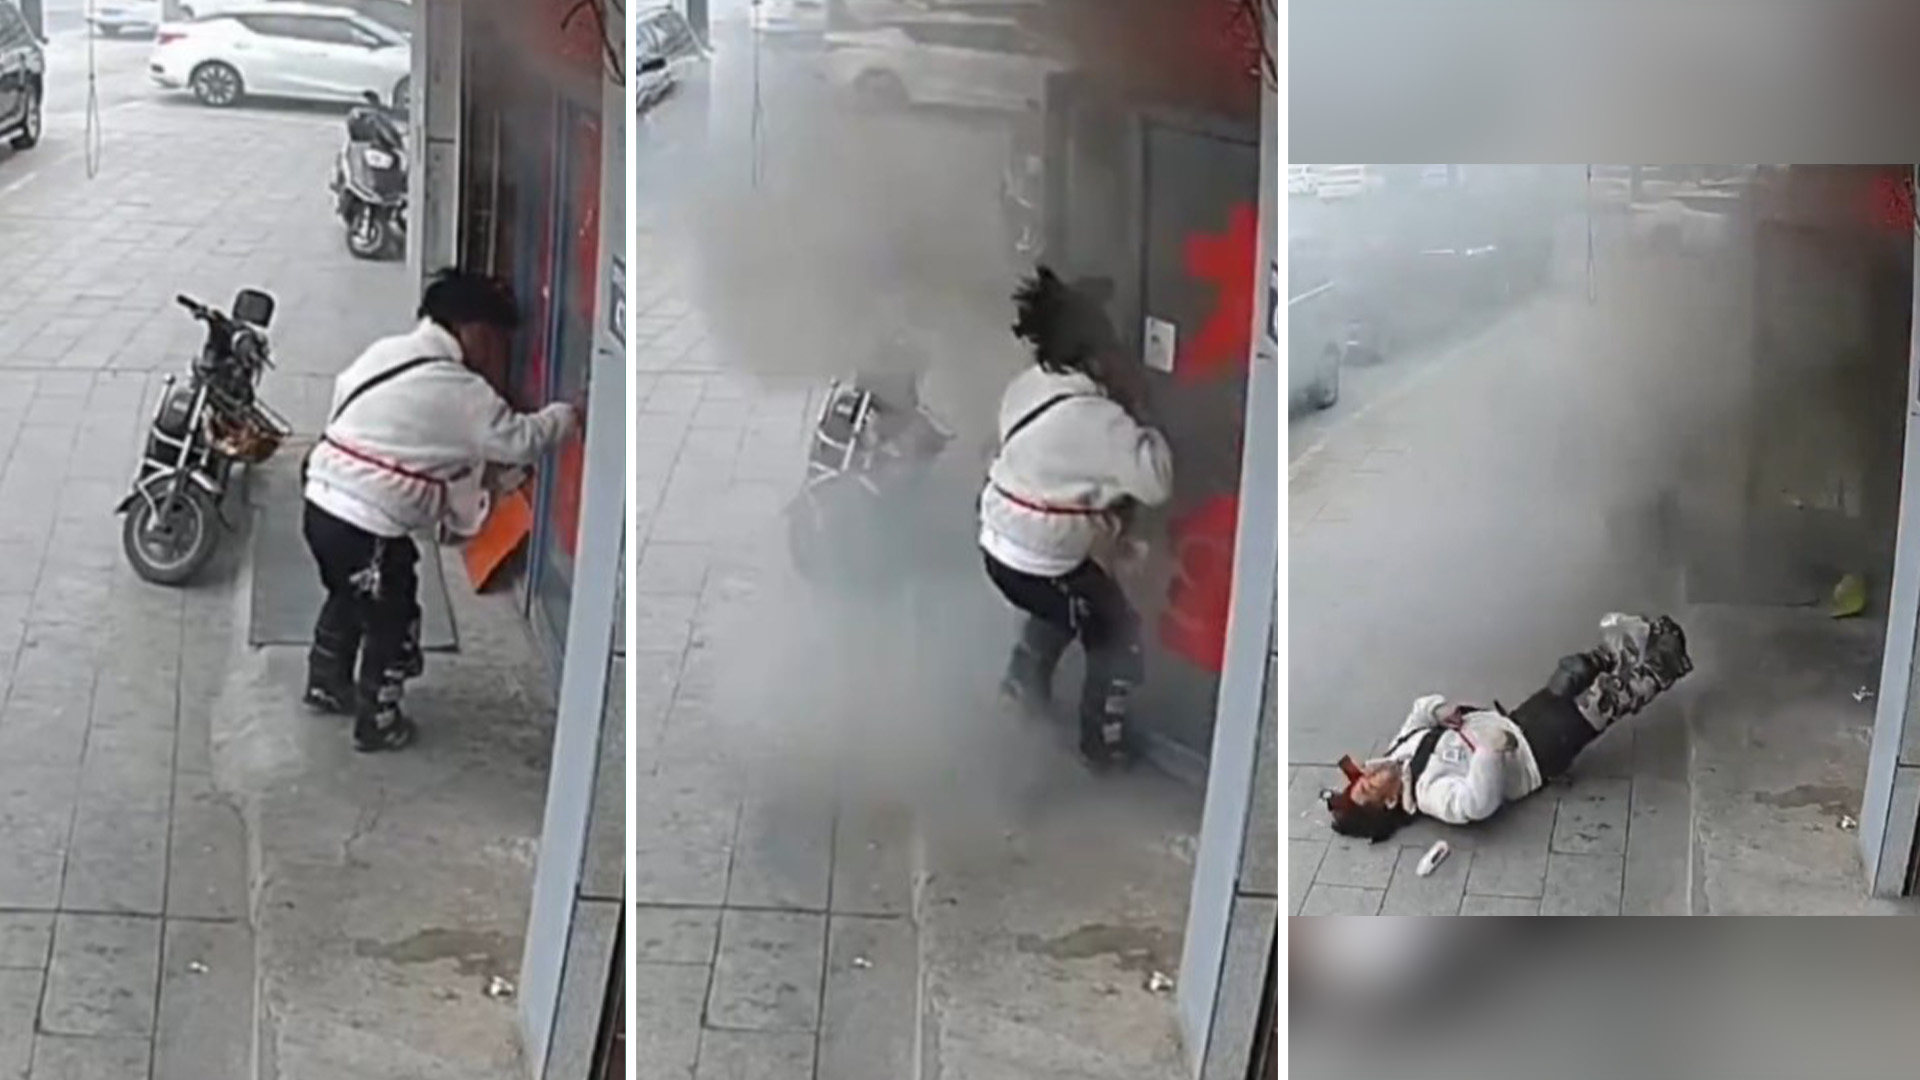 The graphic video of the disabled man’s attempt to help has been viewed more than nine million times on Douyin alone. Photo: SCMP composite/Weibo